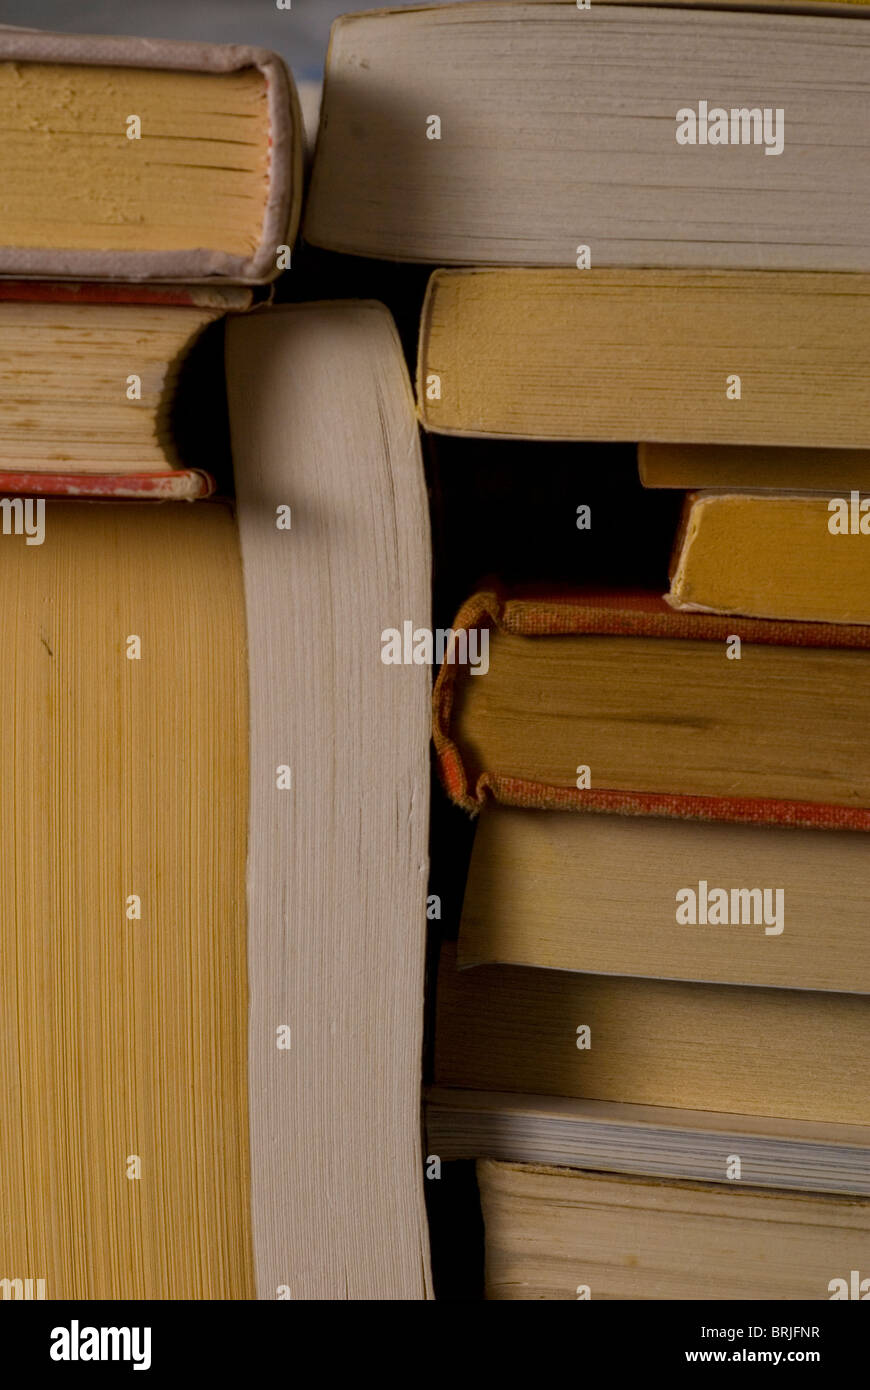 View of stacked and piled up books close up Stock Photo